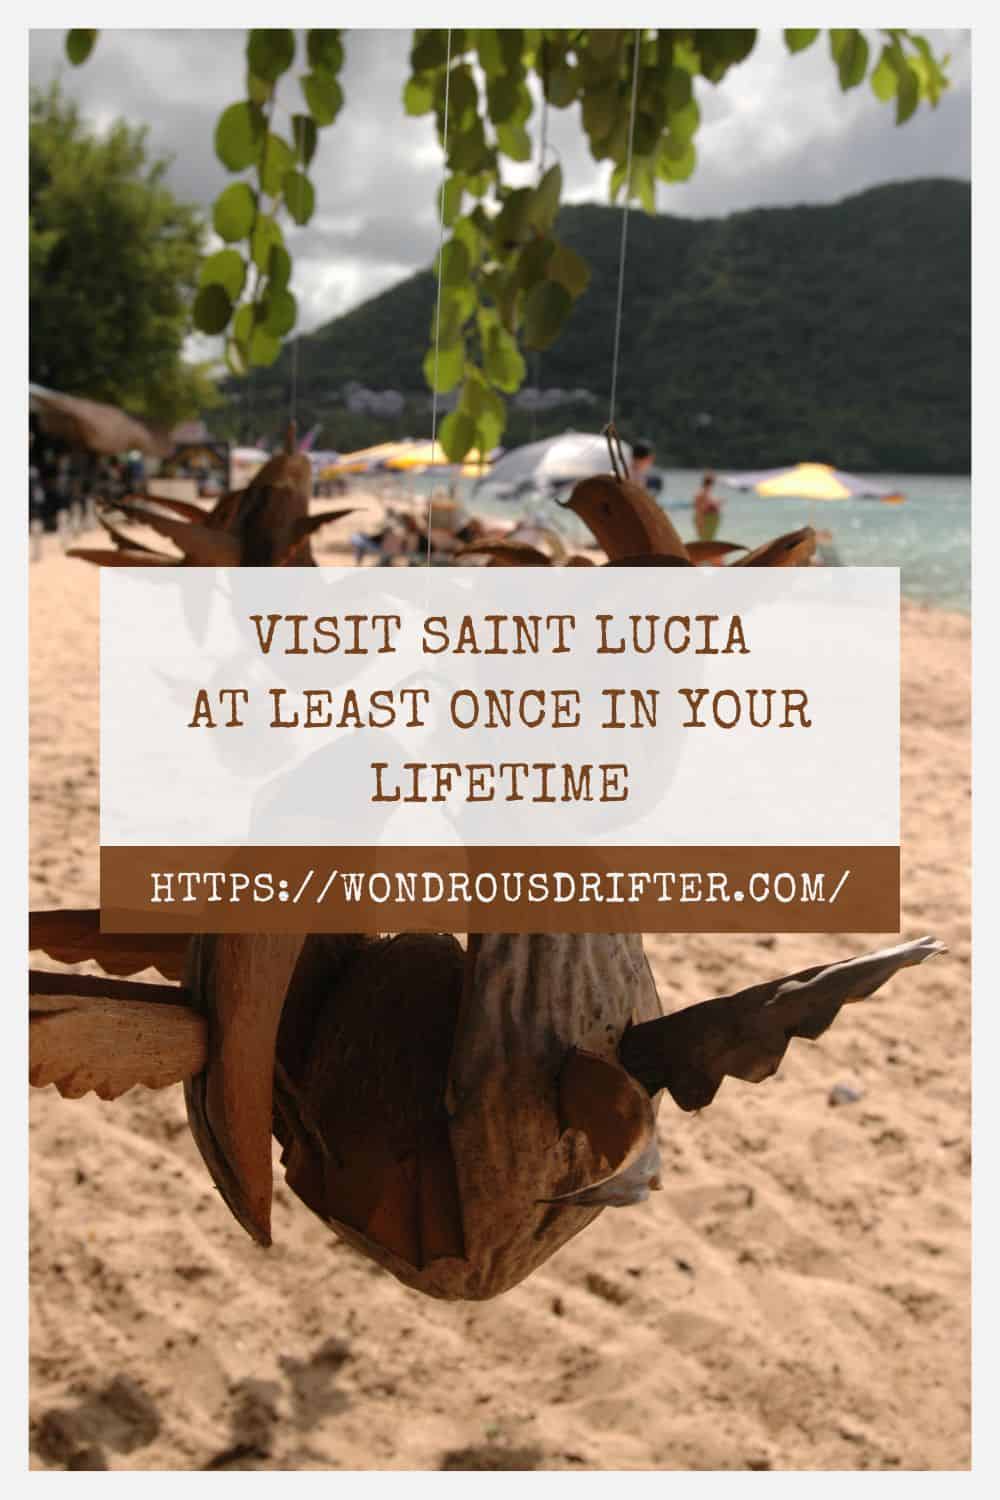 Visit Saint Lucia at least once in your lifetime